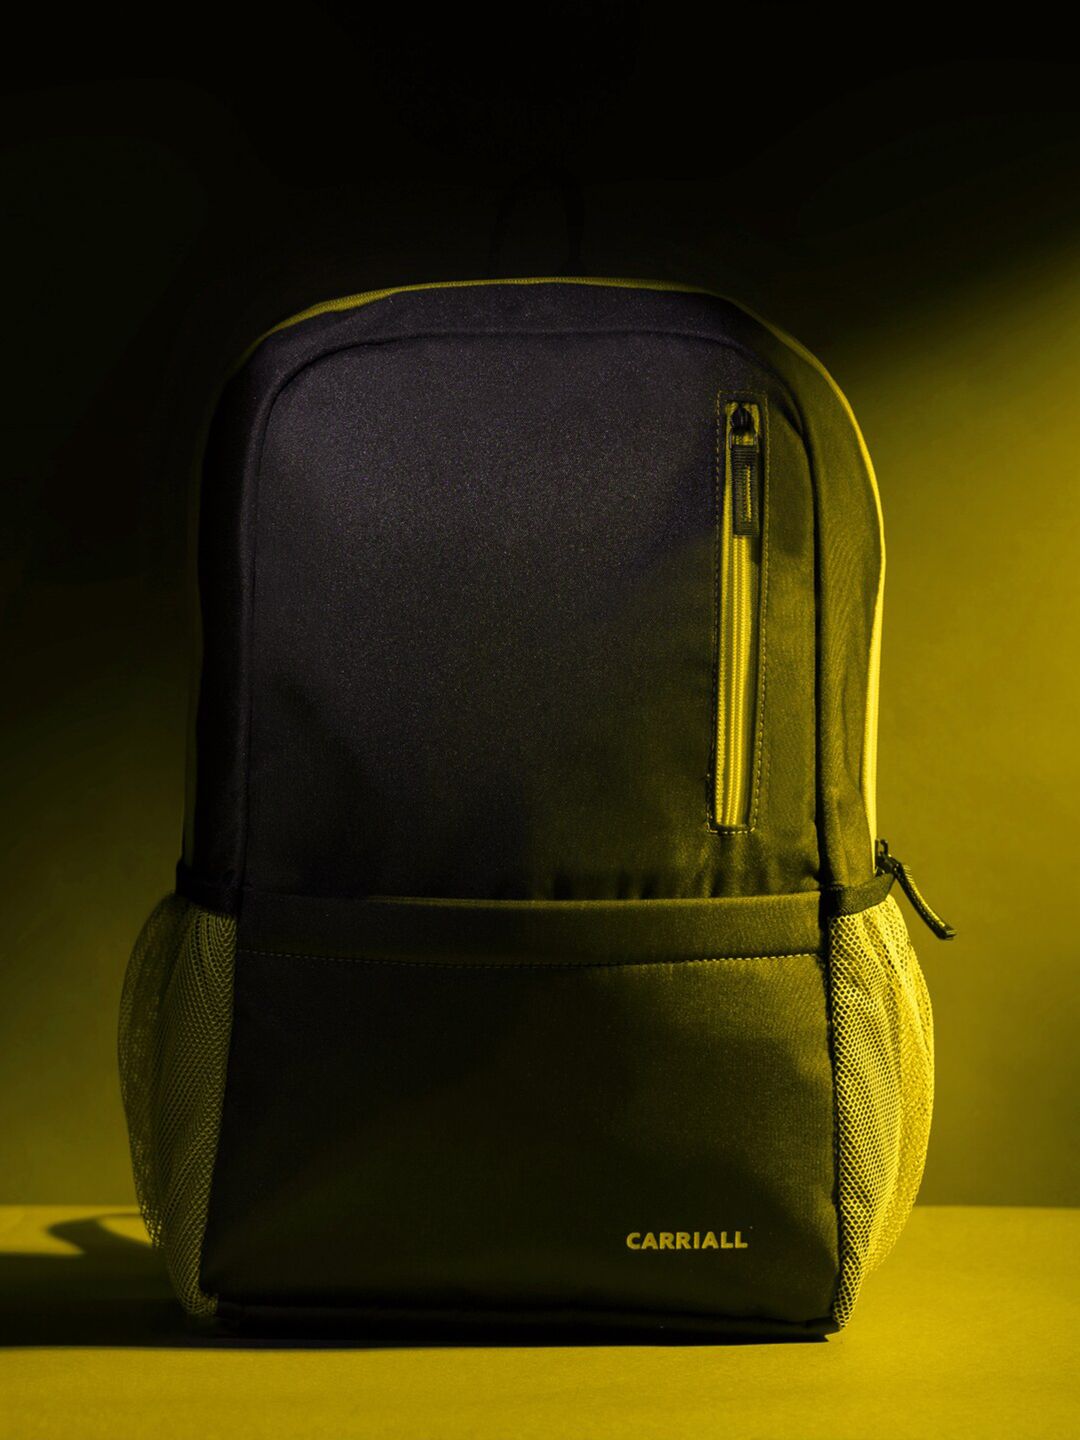 CARRIALL Unisex Yellow & Black Backpack with Reflective Strip Price in India